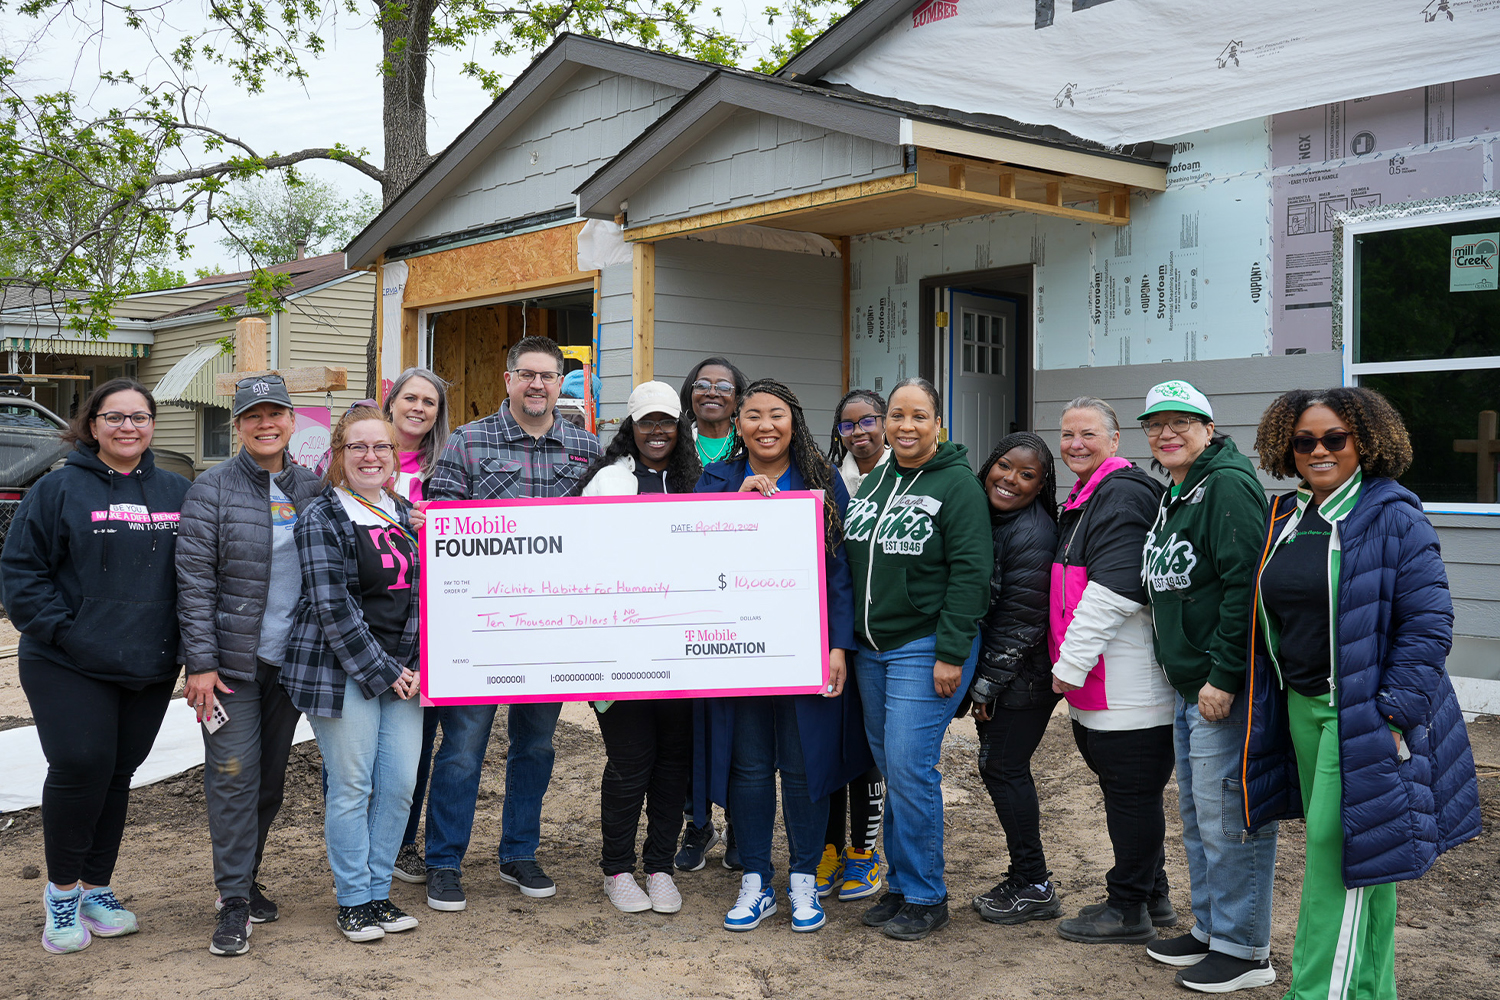 Representatives of T-Mobile, Wichita Habitat, and volunteers holding a $10,000 check.